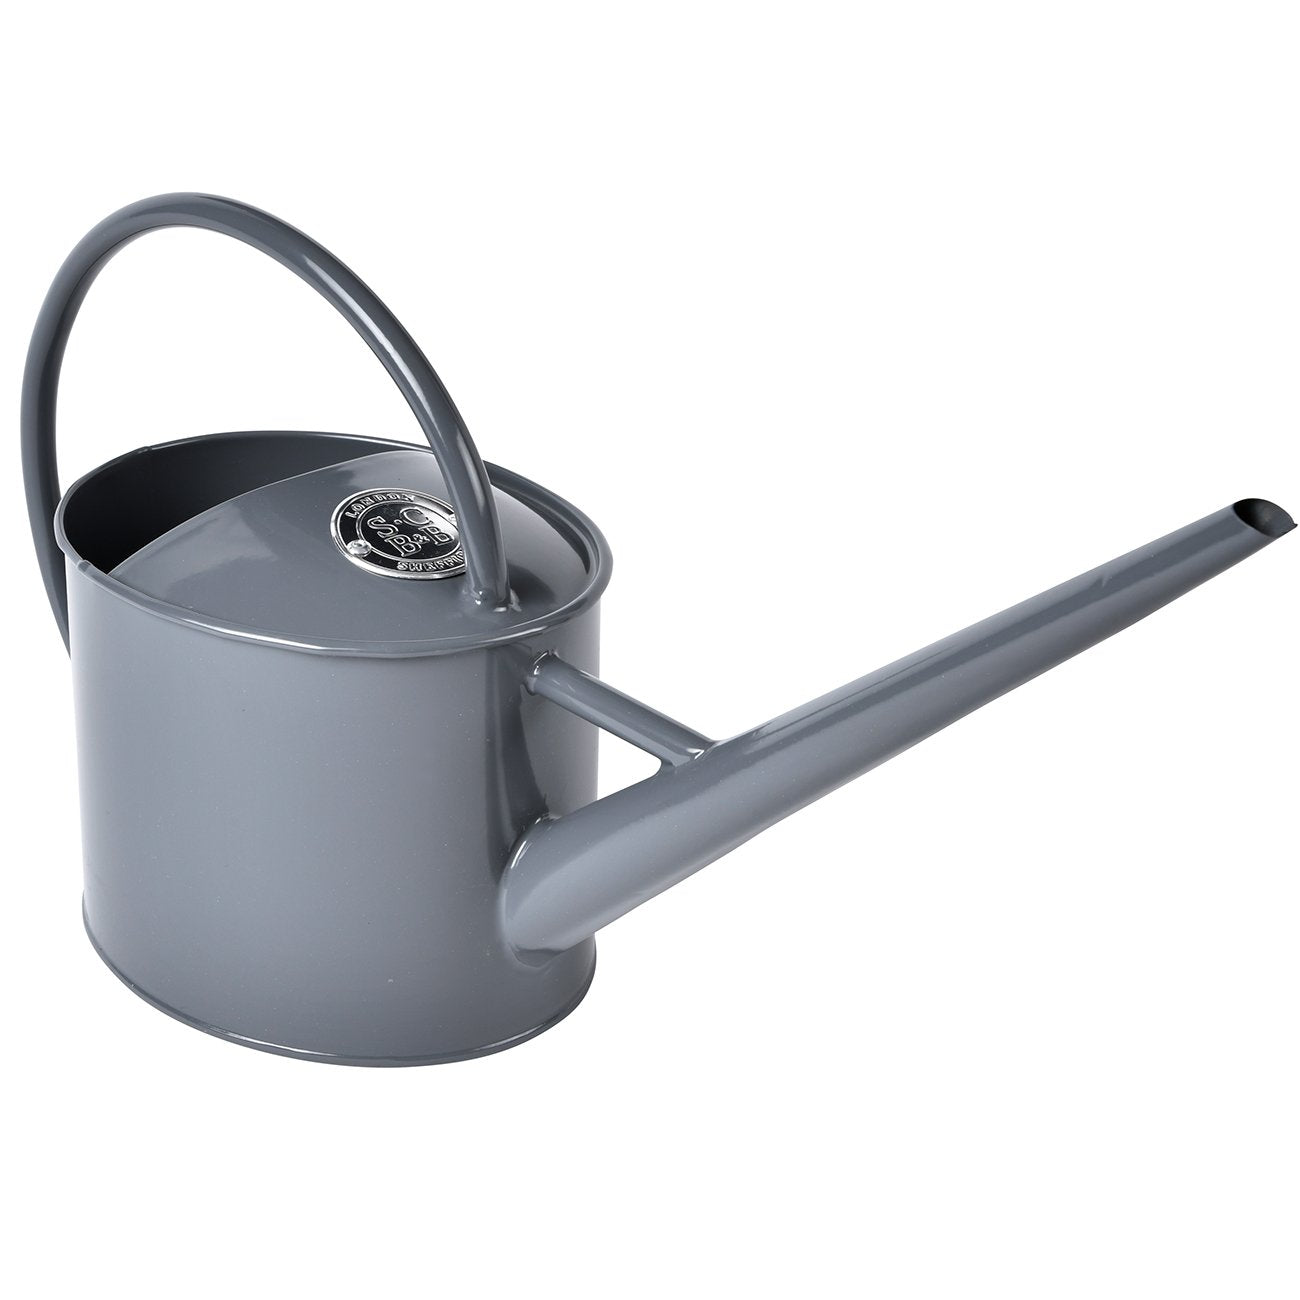 Who said watering cans couldn't be a luxury item?? Seriously though, we've been through enough of the garden-variety sort to realise that this is one item worth investing in. And when it looks this good...